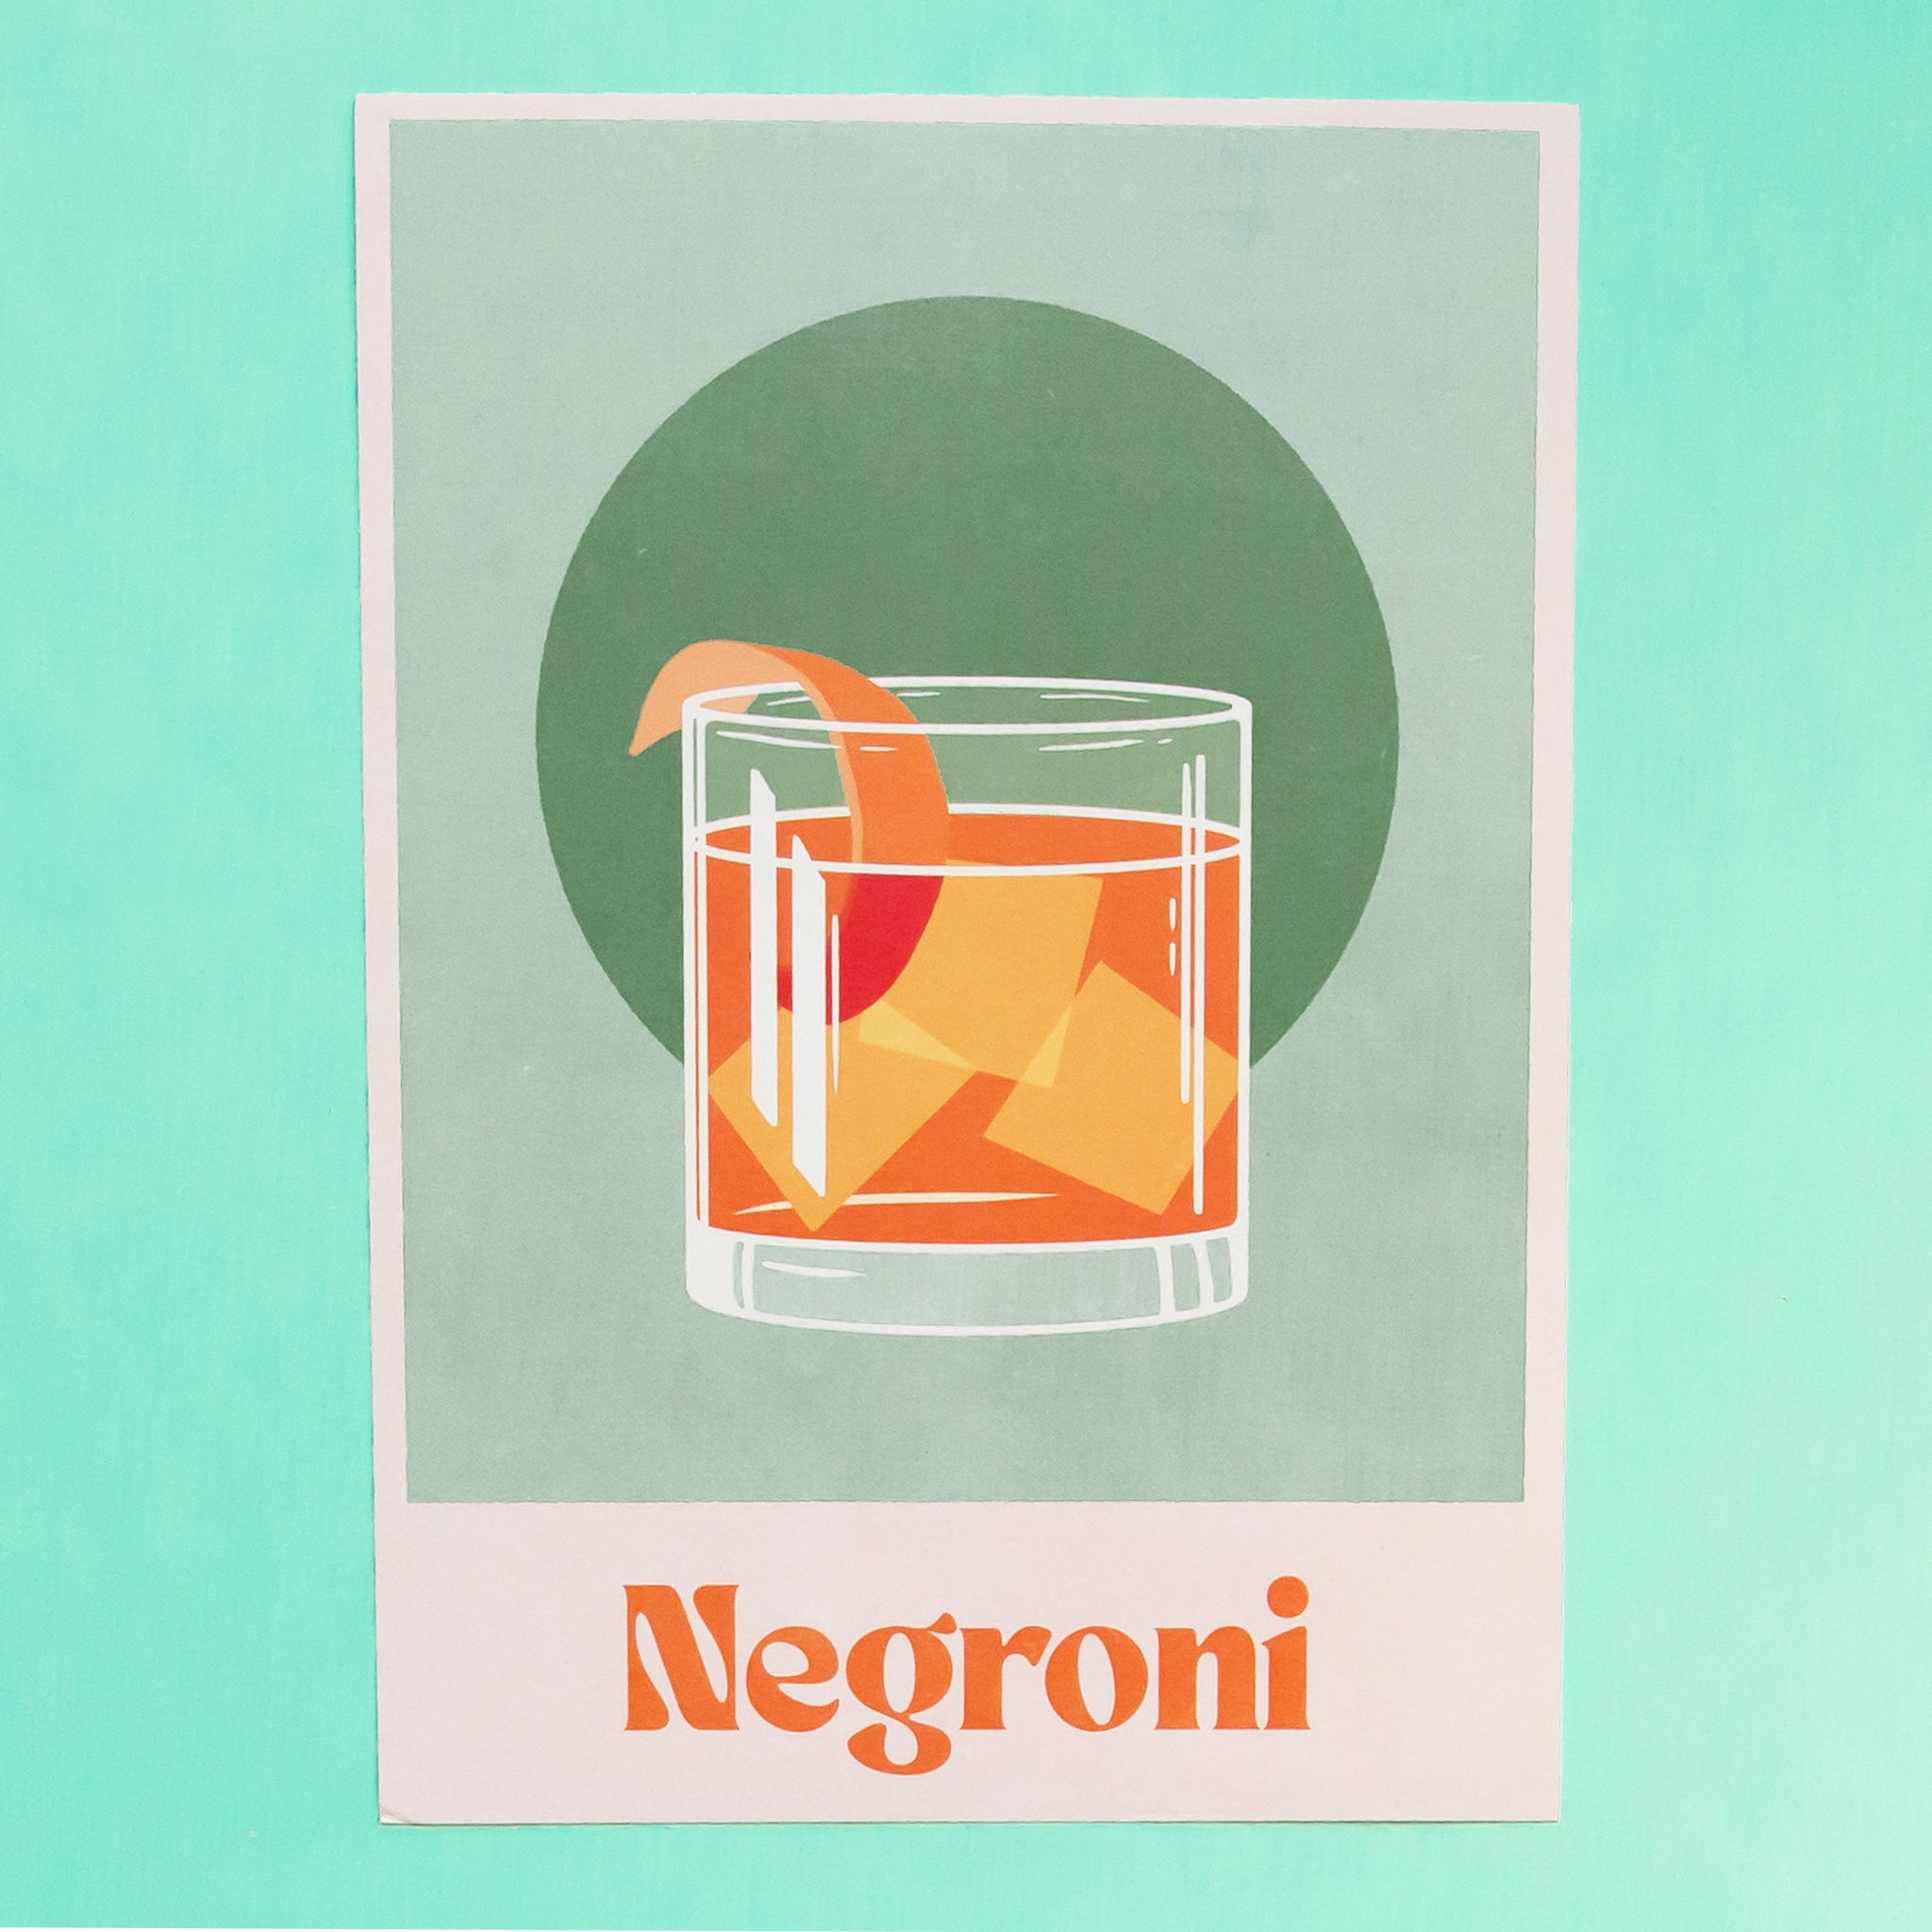 On a teal  background is a green art print with an off white border and orange text at the bottom that reads, "Negroni" as well as a graphic of a Negroni cocktail with an orange peel in the center.